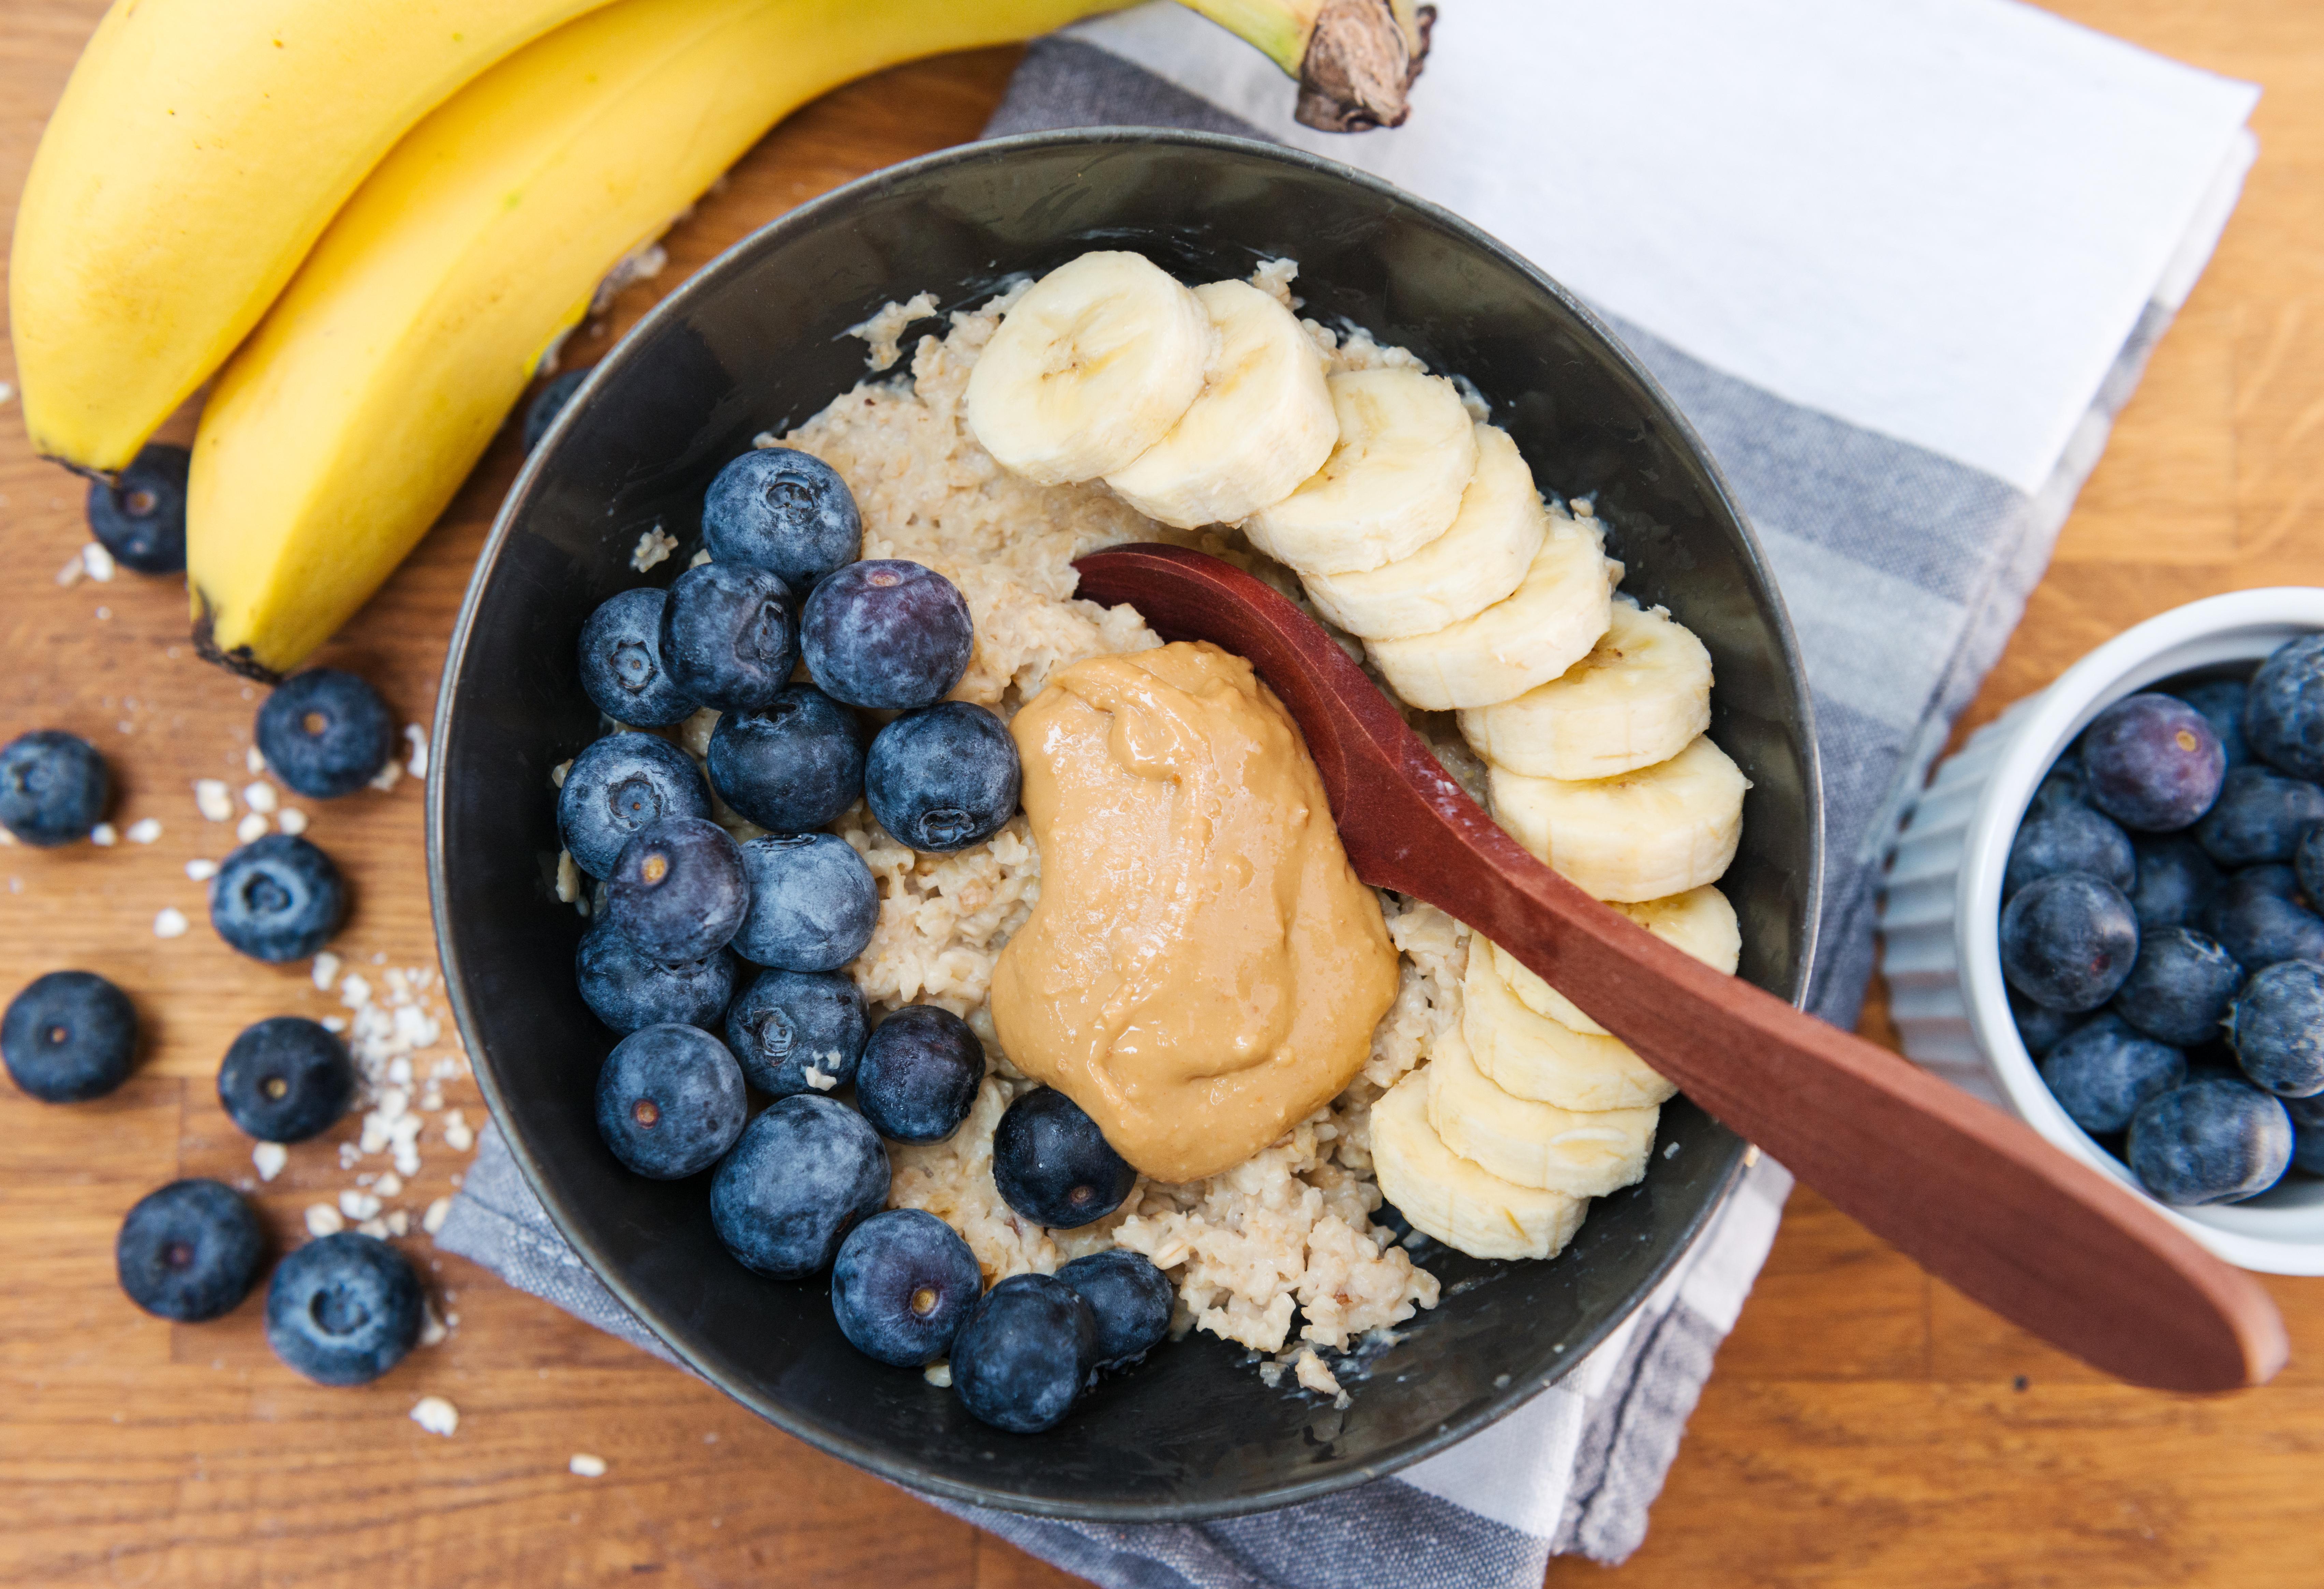 Large bowl of oatmeal with blueberries, bananas, and peanut butter. (Shutterstock -- LW rights)